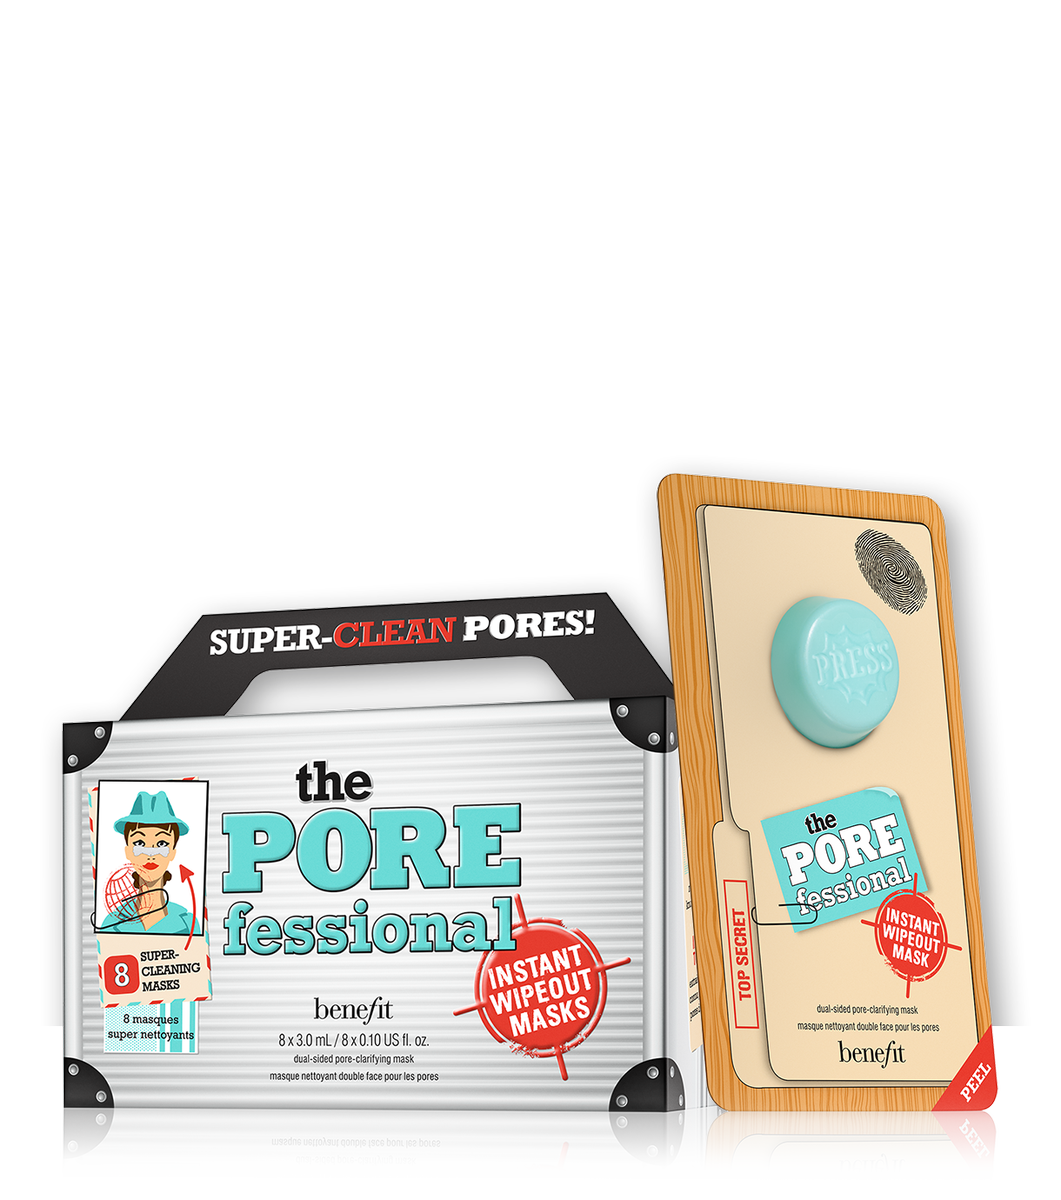 the porefessional instant wipeout mask hero